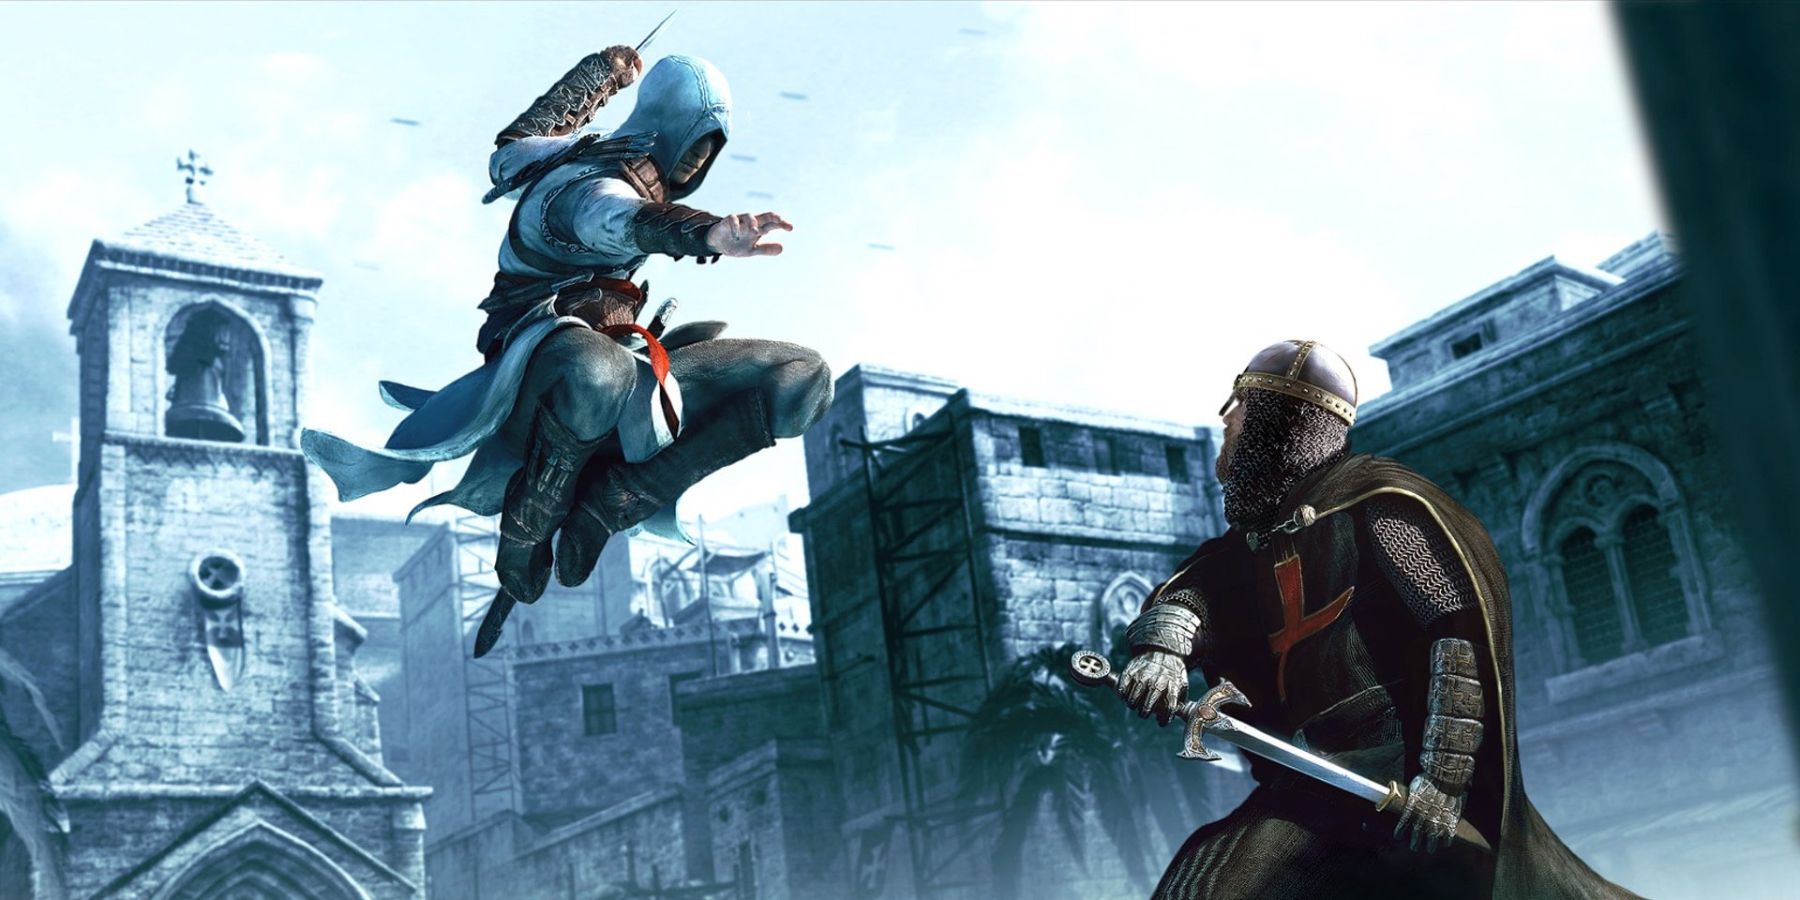 Assassin's Creed began in 2007 and has grown into one of gaming's largest franchises with over 20 games total